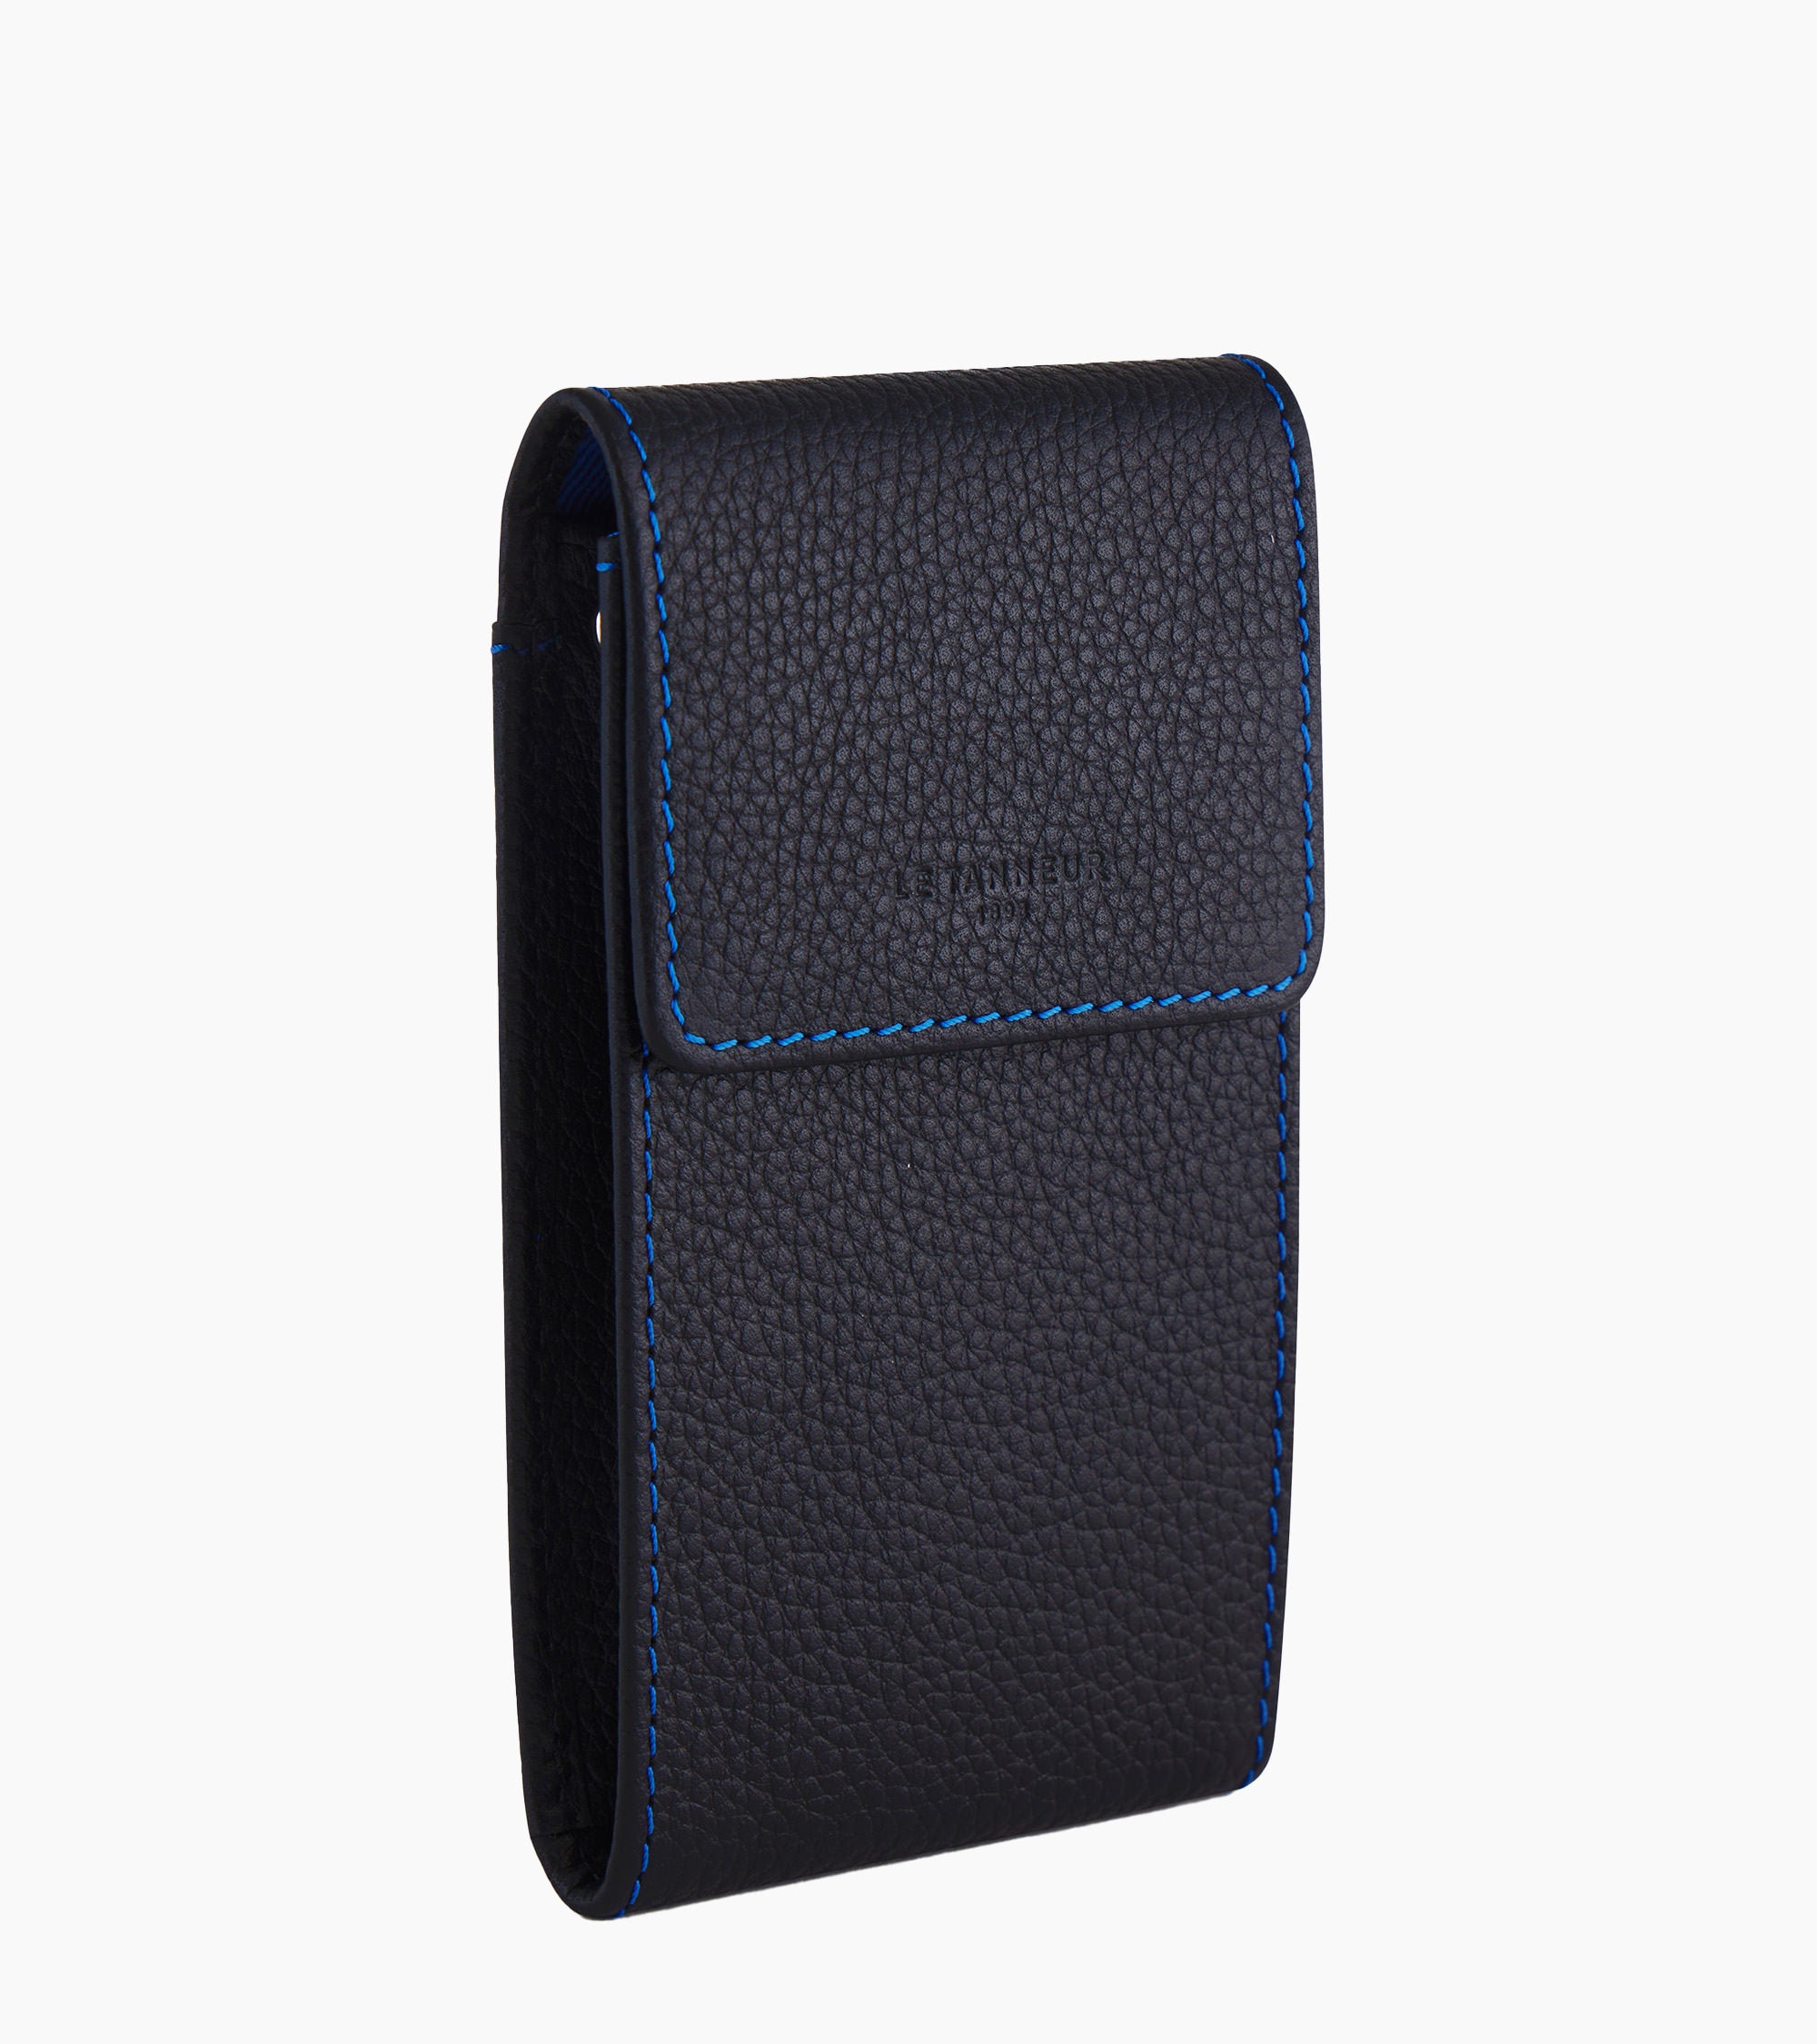 Charles key case with flap closure in grained leather